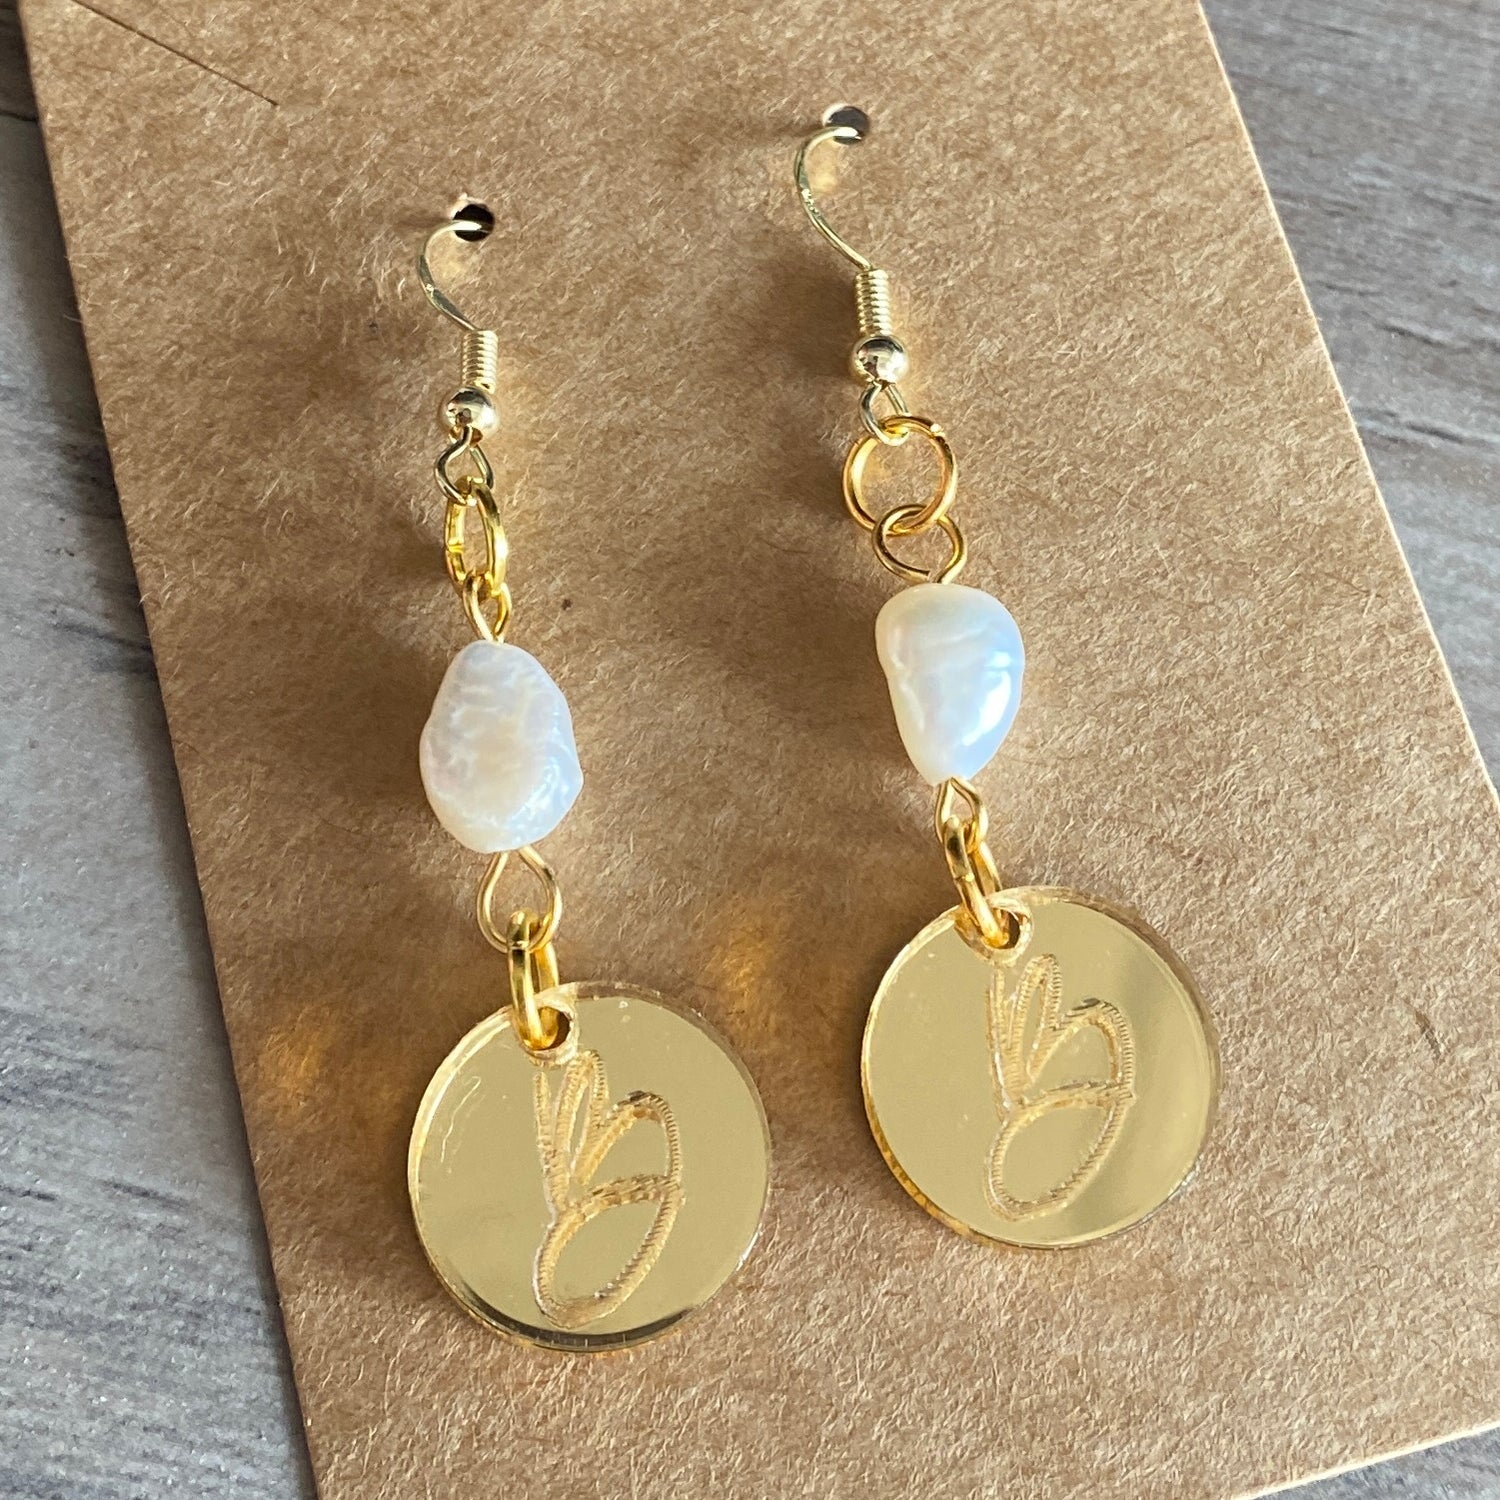 Engraved Initial Earrings with Pearl